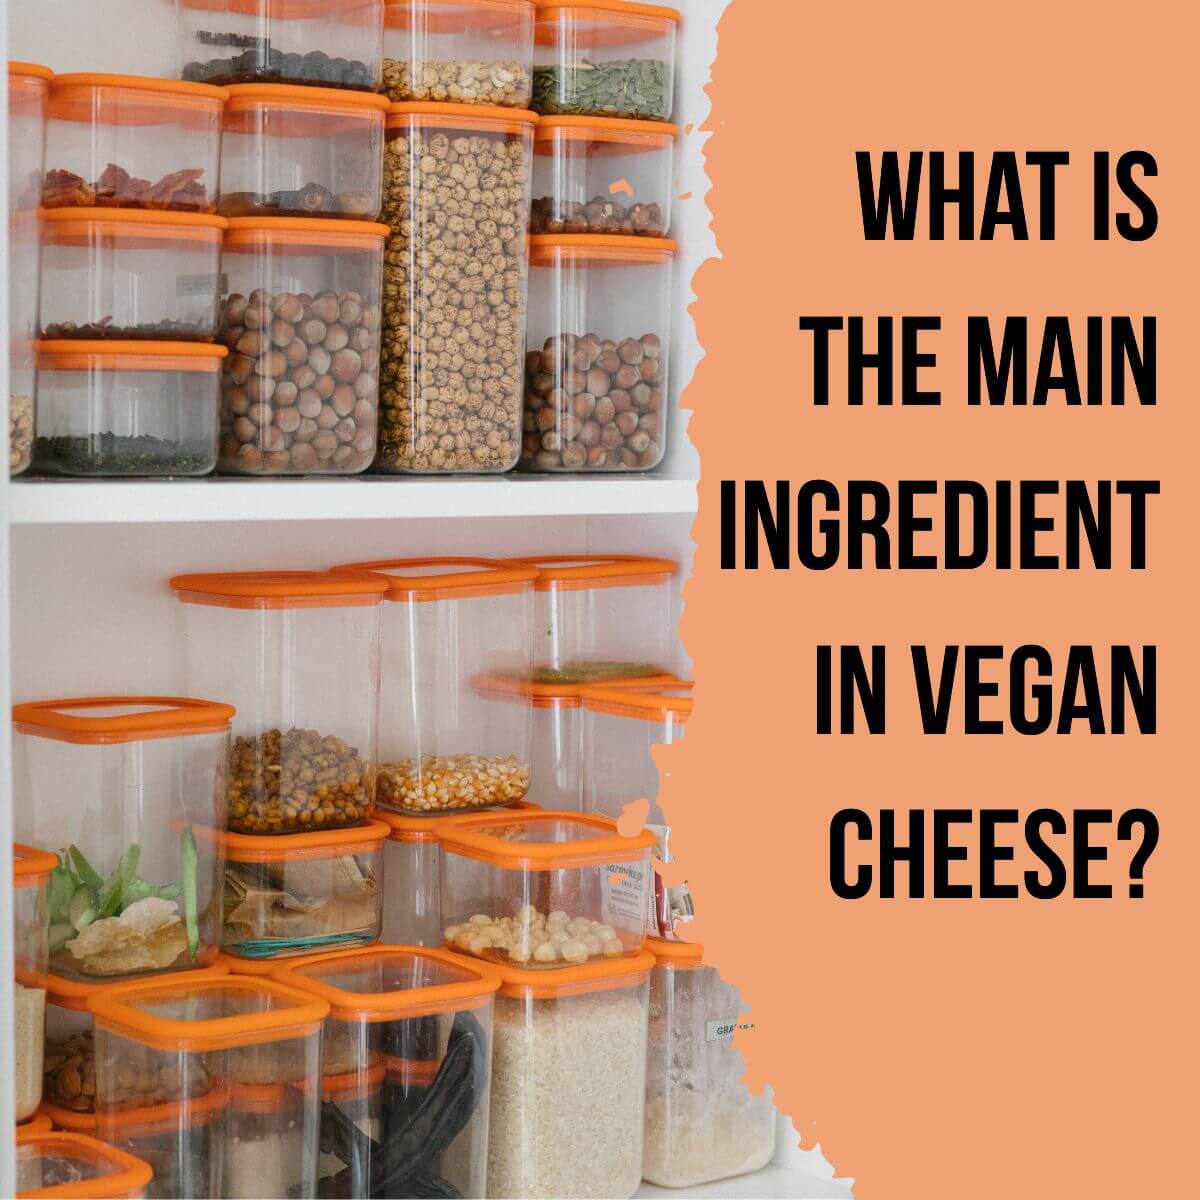 What is the main ingredient in vegan cheese?